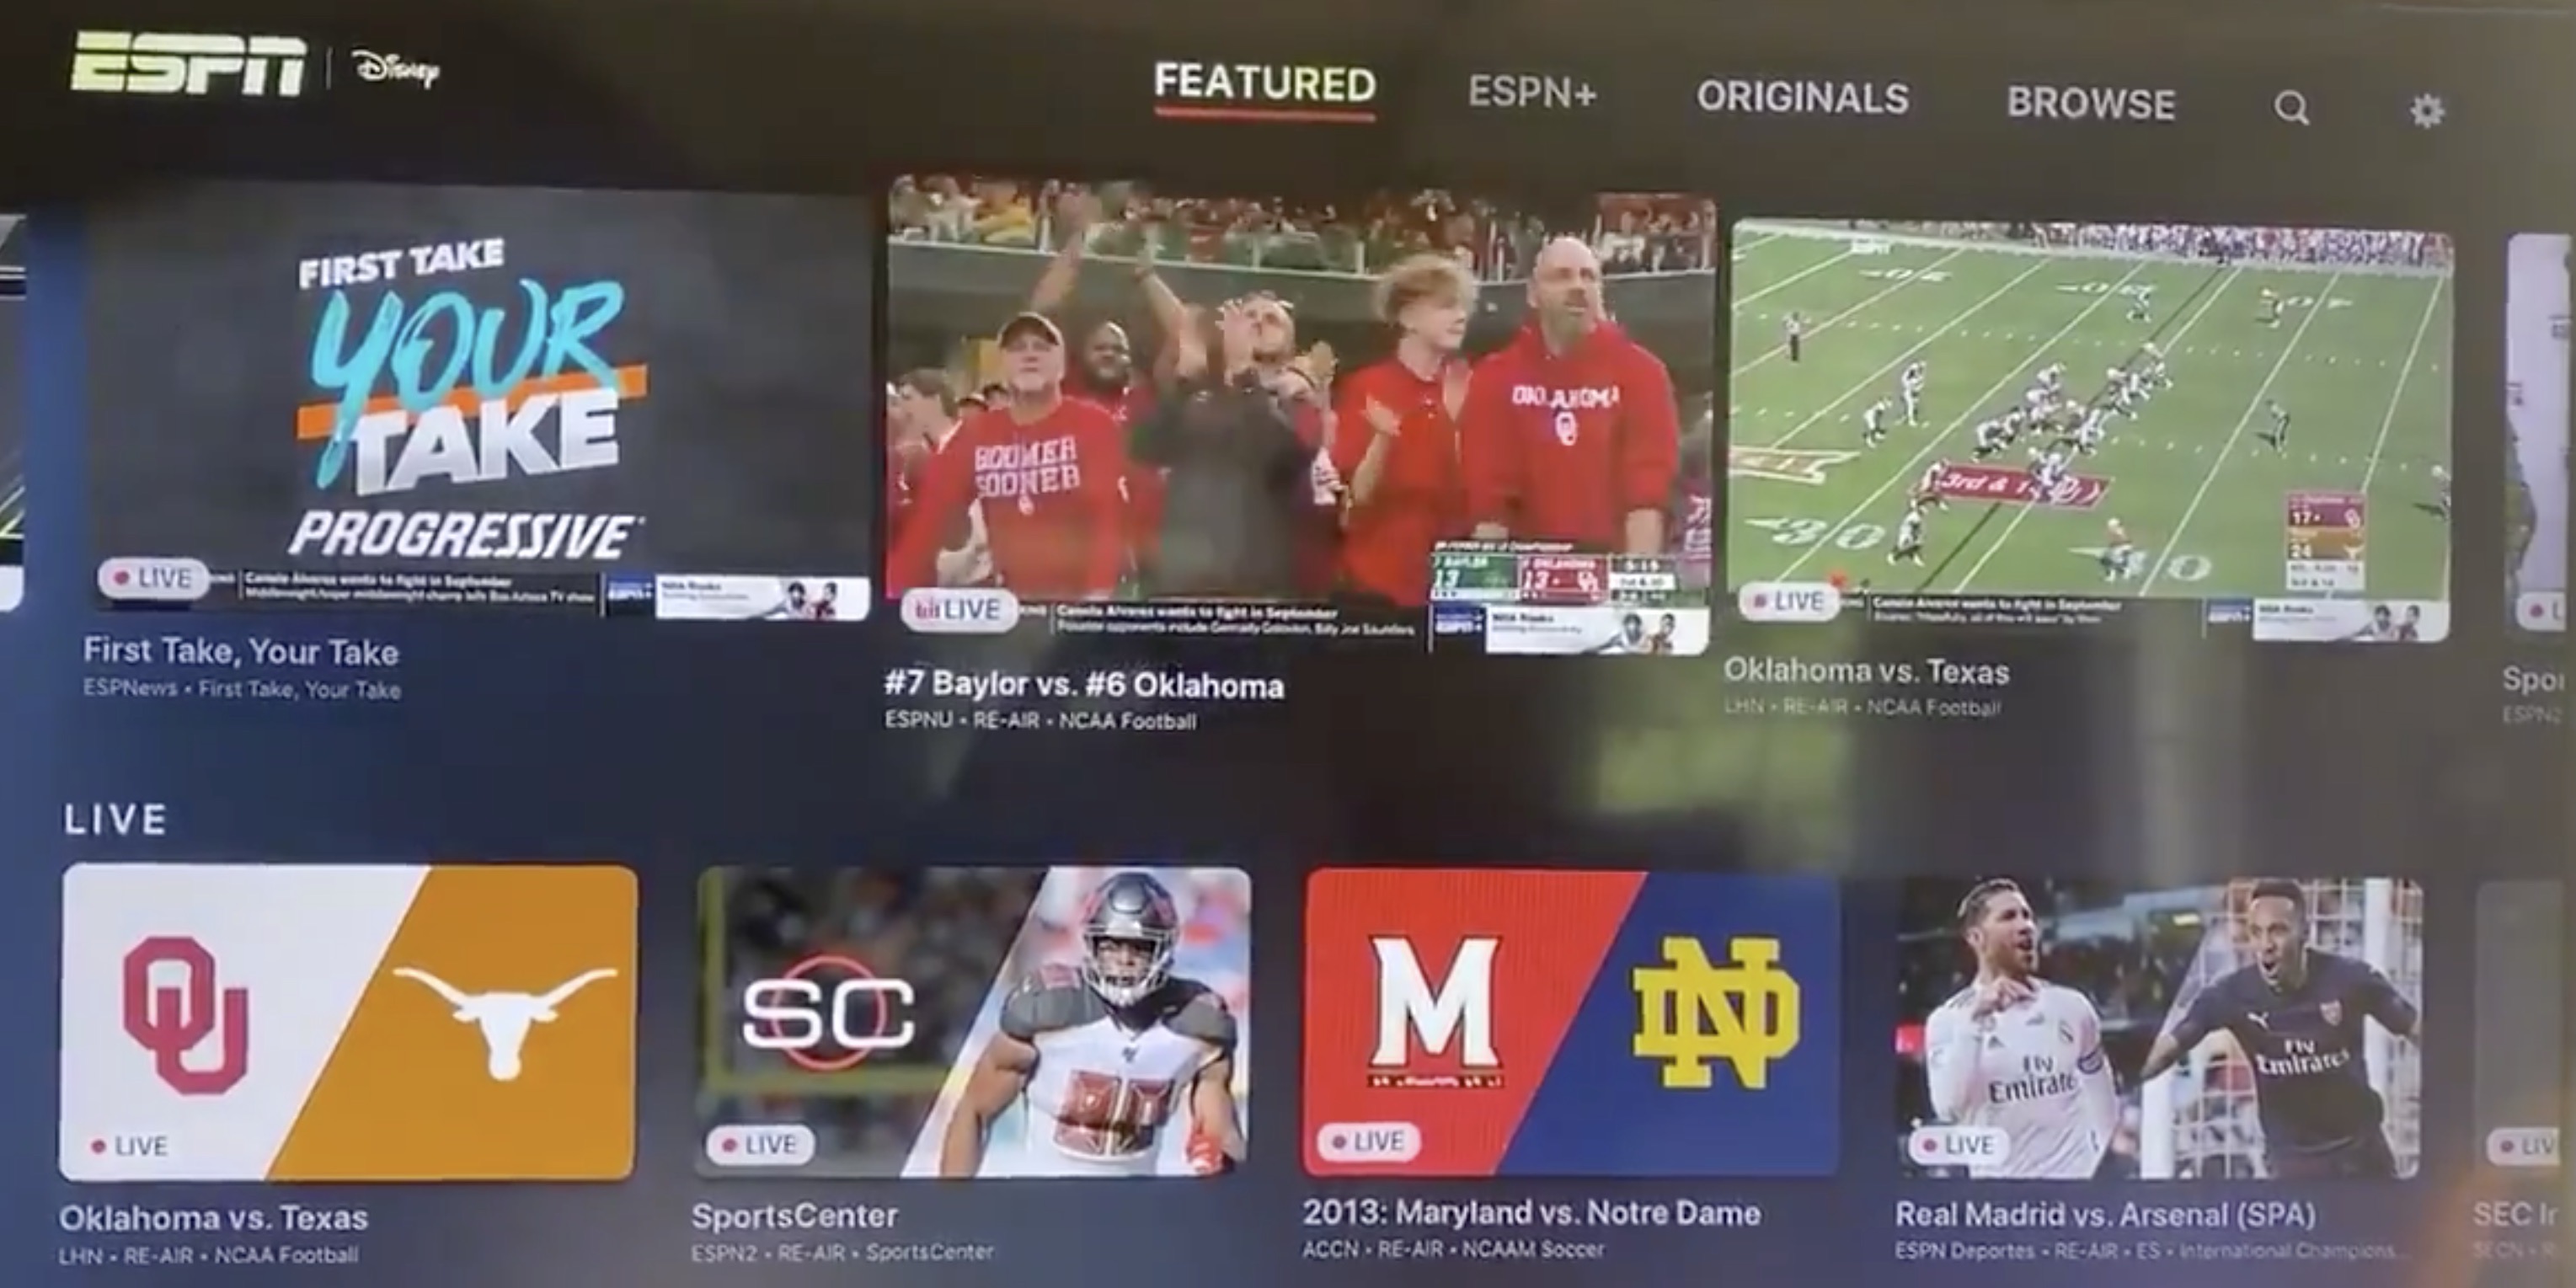 ESPN for Apple TV now lets you auto play 3 live games/channels at once on home screen